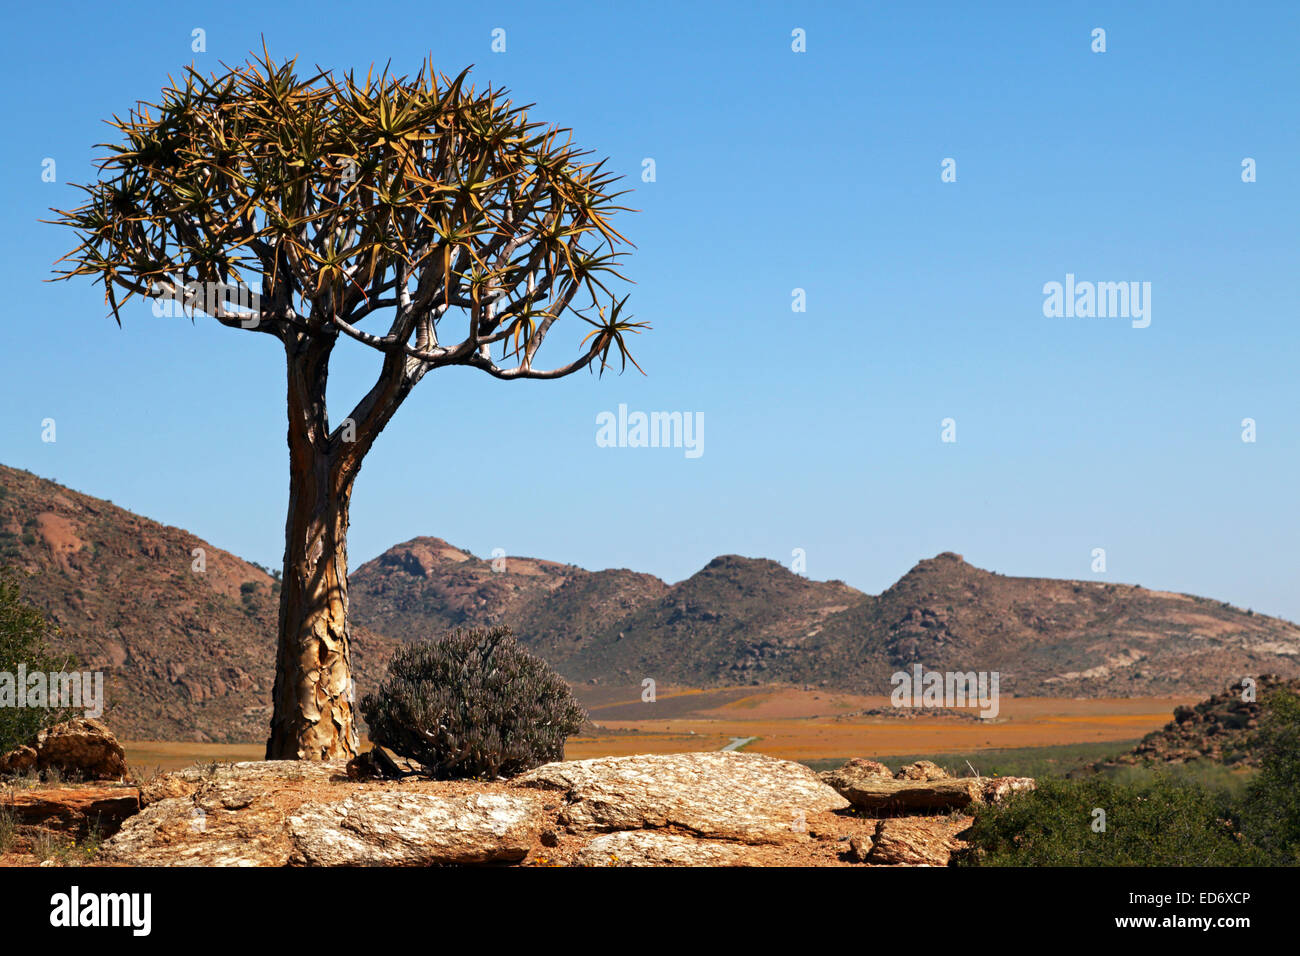 Kokerboom big Quivertree Namaqualand Northern Cape South Africa Stock Photo